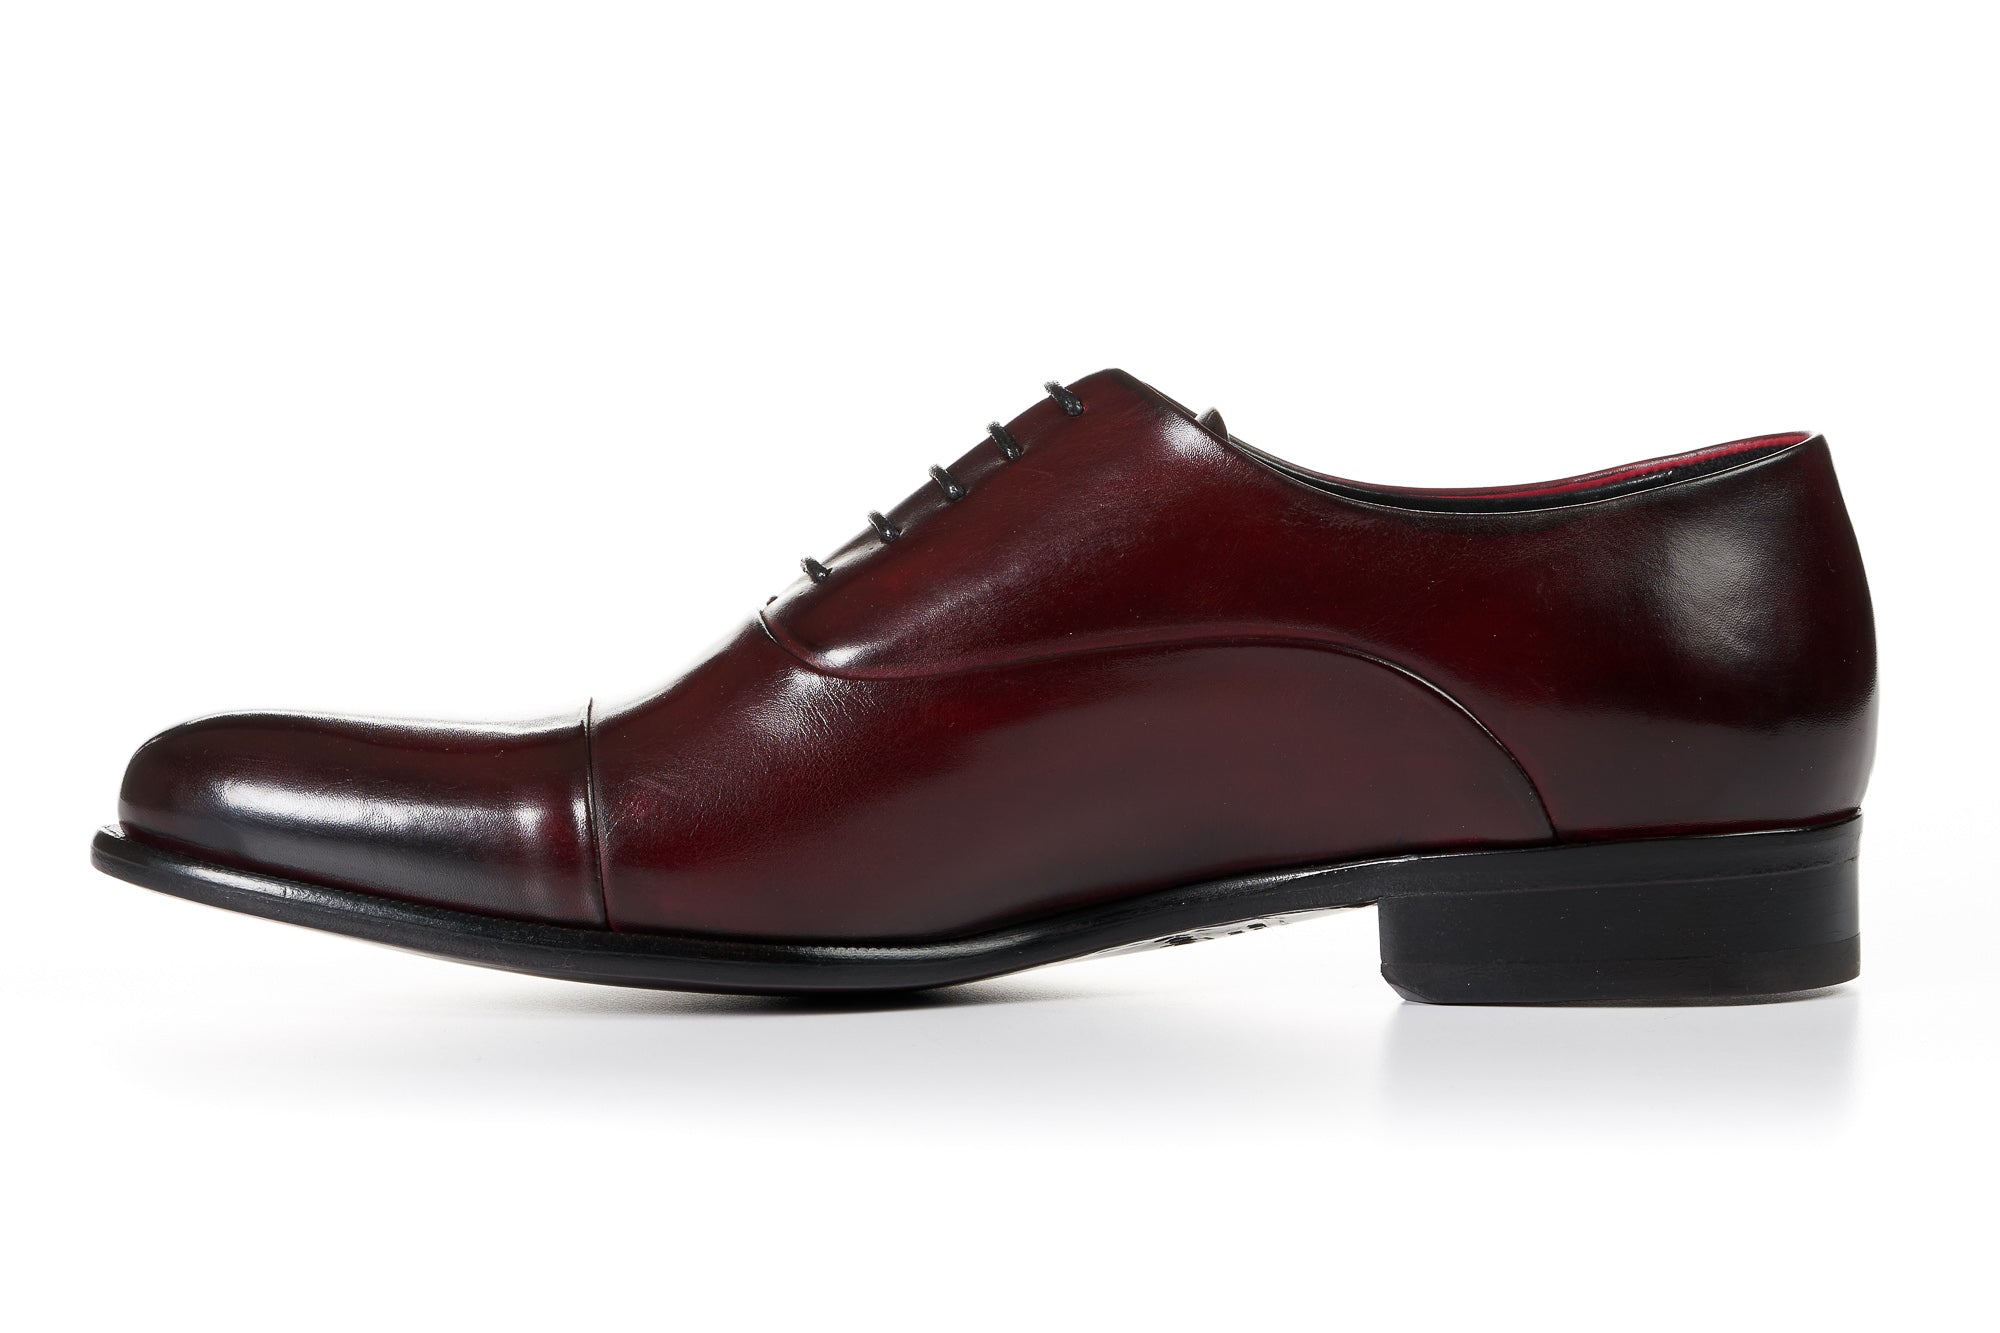 The Cagney Cap-Toe Oxford - Oxblood